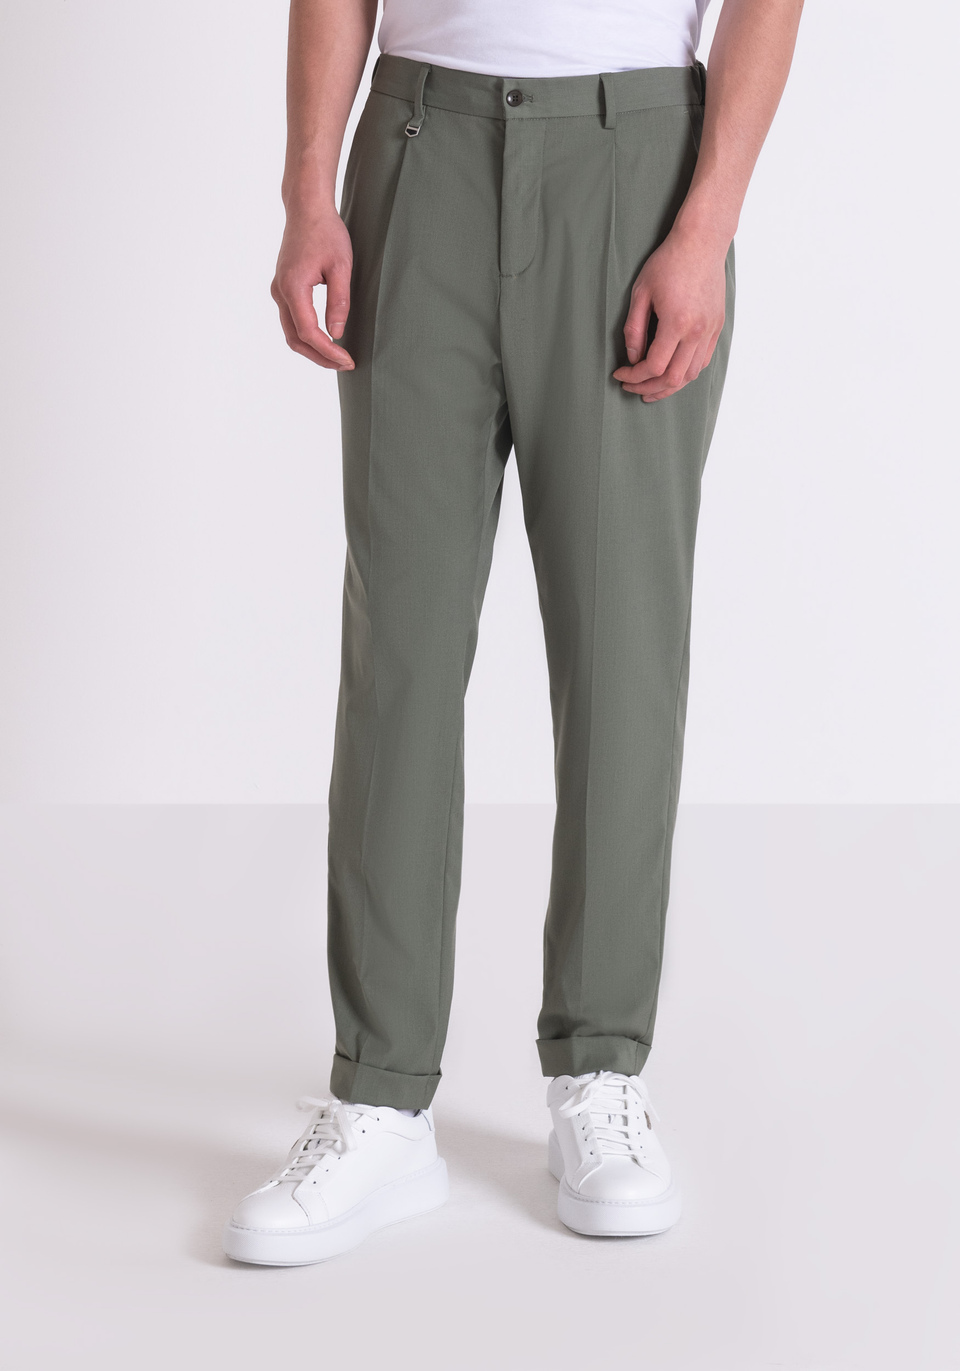 Men's fashion Polycotton Solid Shirt & Trouser Fabric Price in India - Buy  Men's fashion Polycotton Solid Shirt & Trouser Fabric online at Flipkart.com